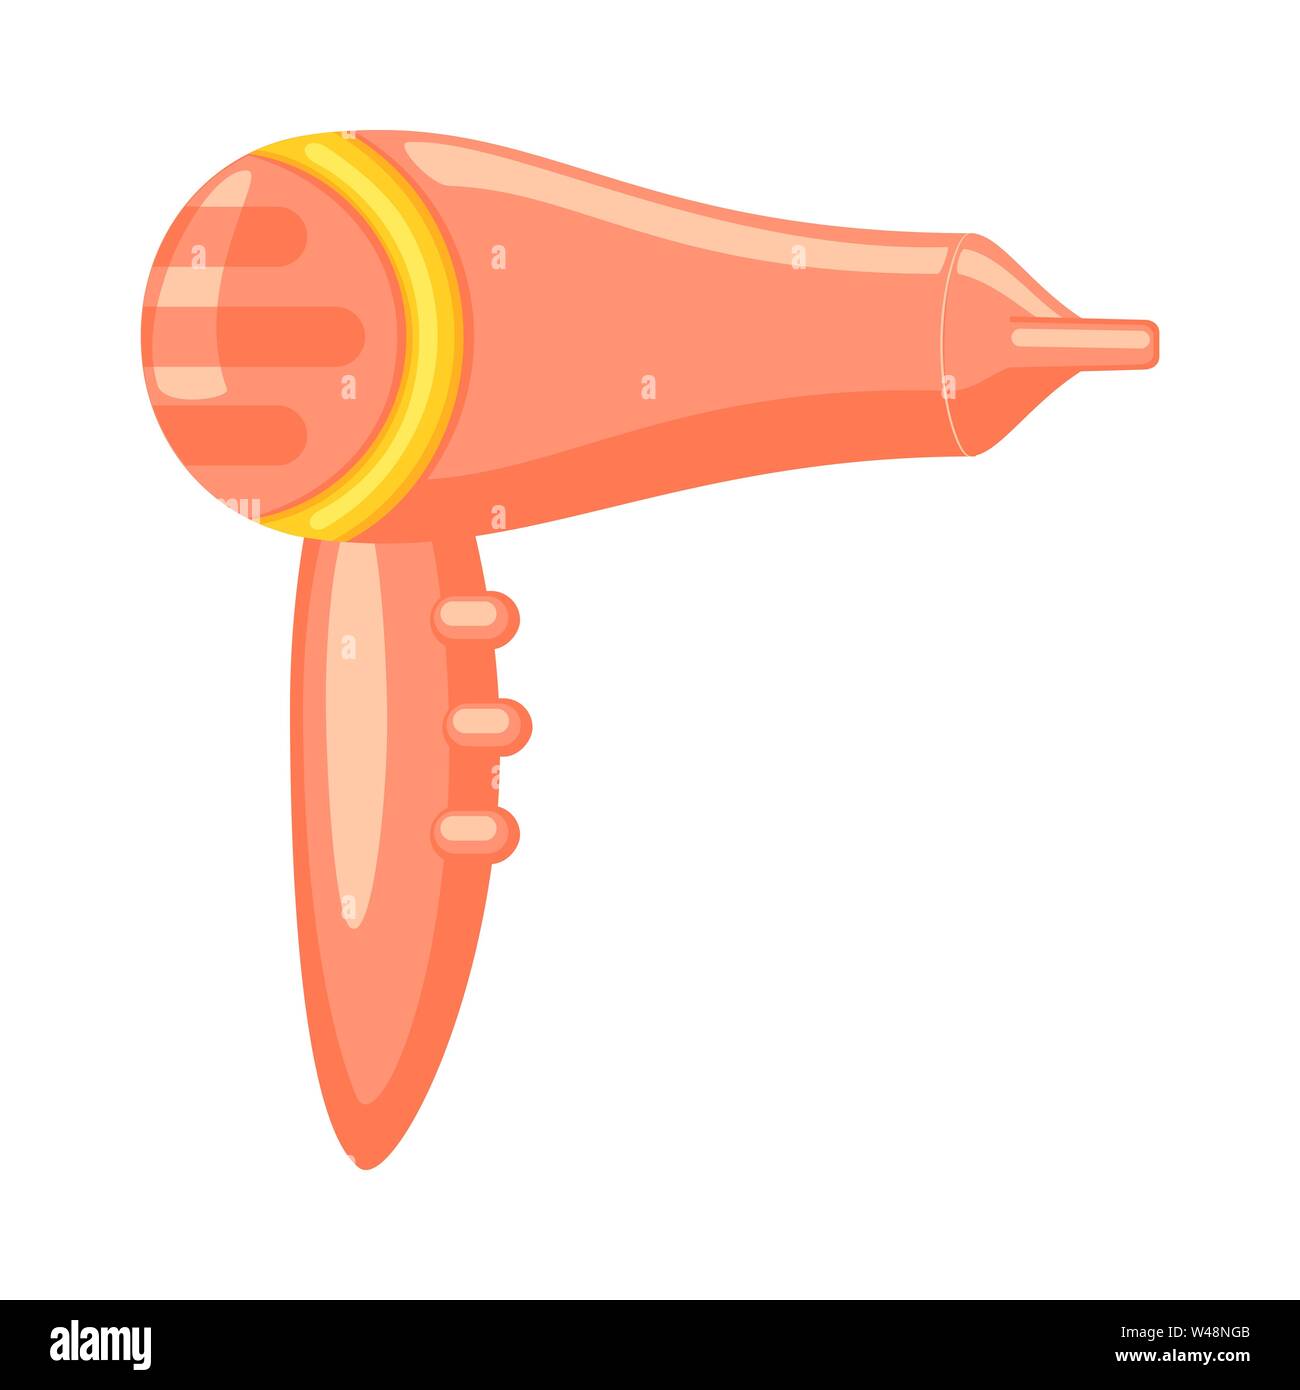 Cartoon pink hairdryer with concentrator nozzle Stock Vector